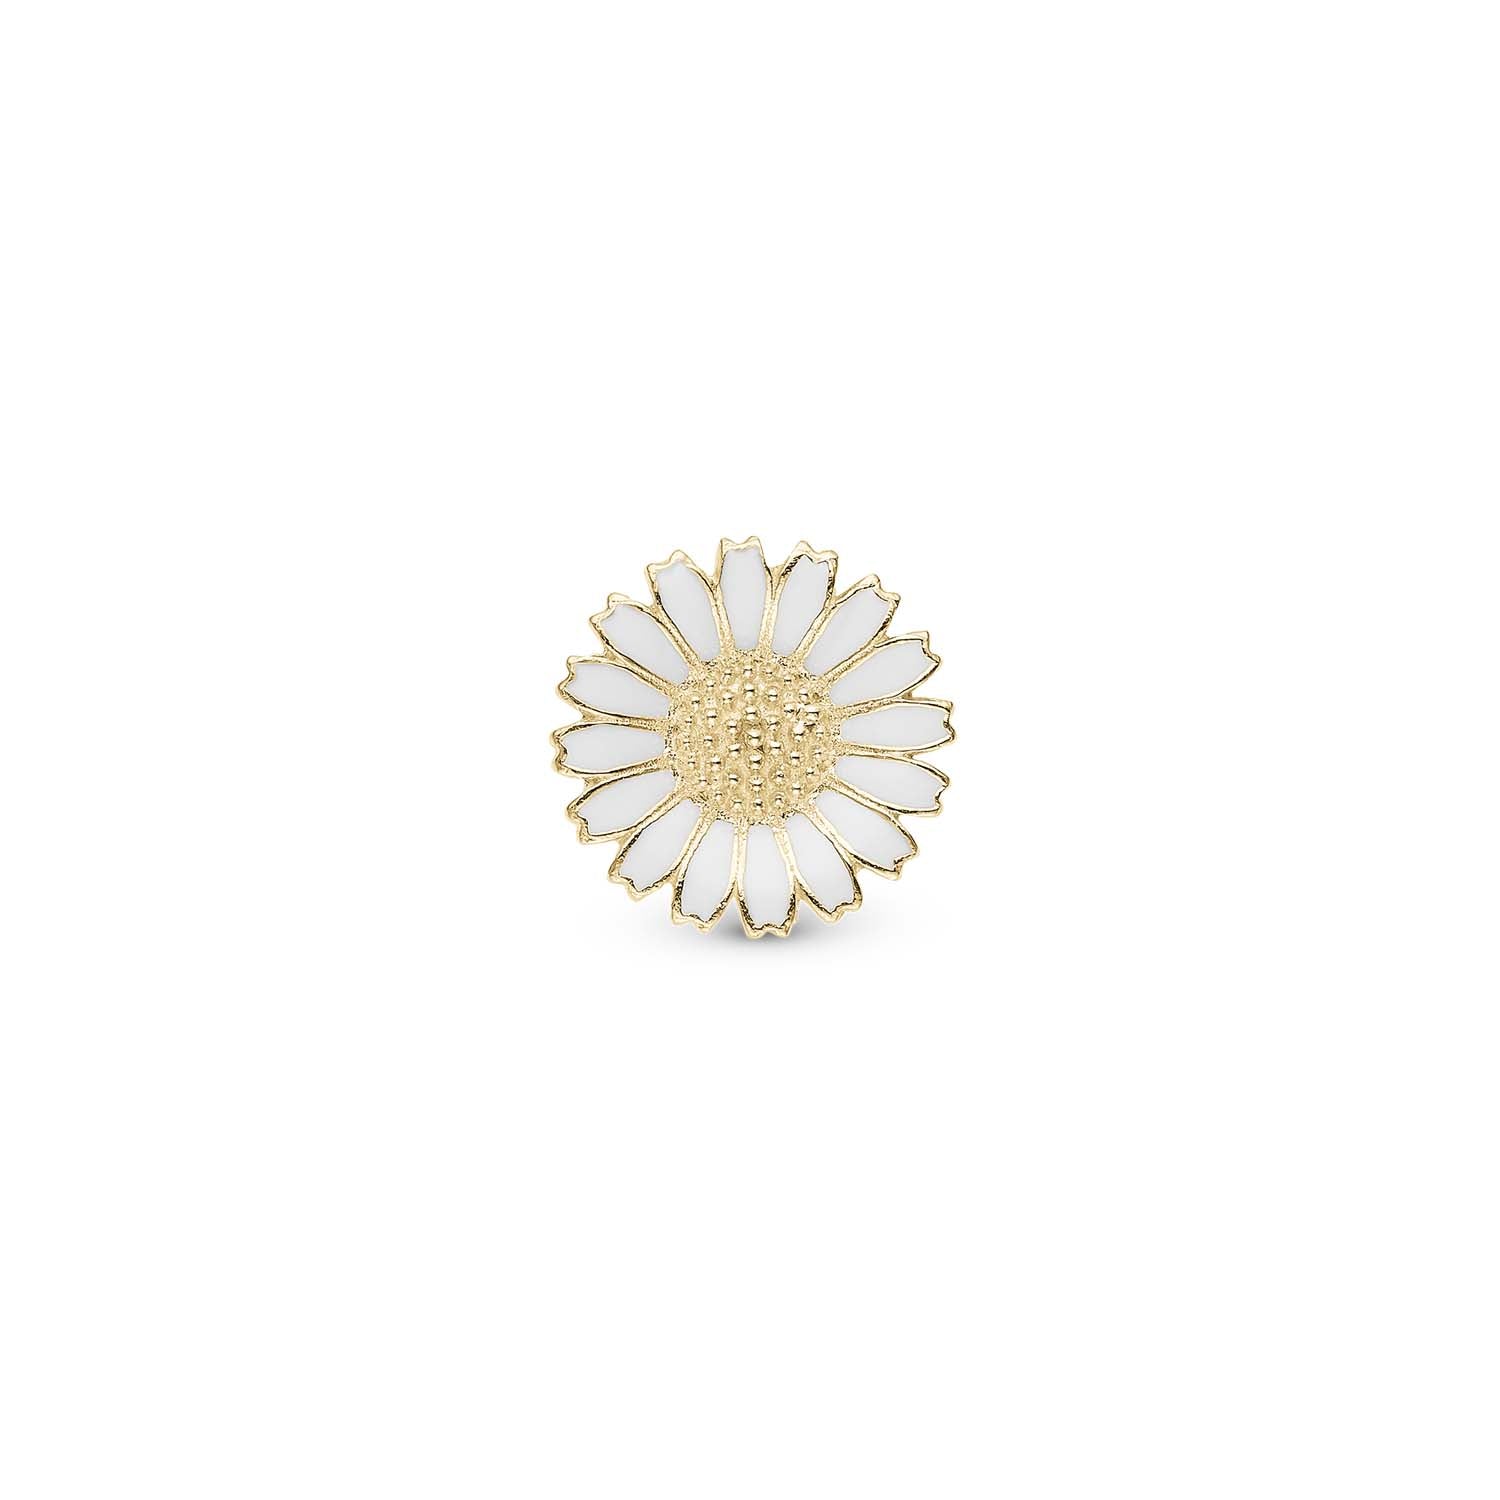 Christina Design London Jewelry & Watches - Marguerit ring charm, 6 mm Forgyldt sterlingsølv